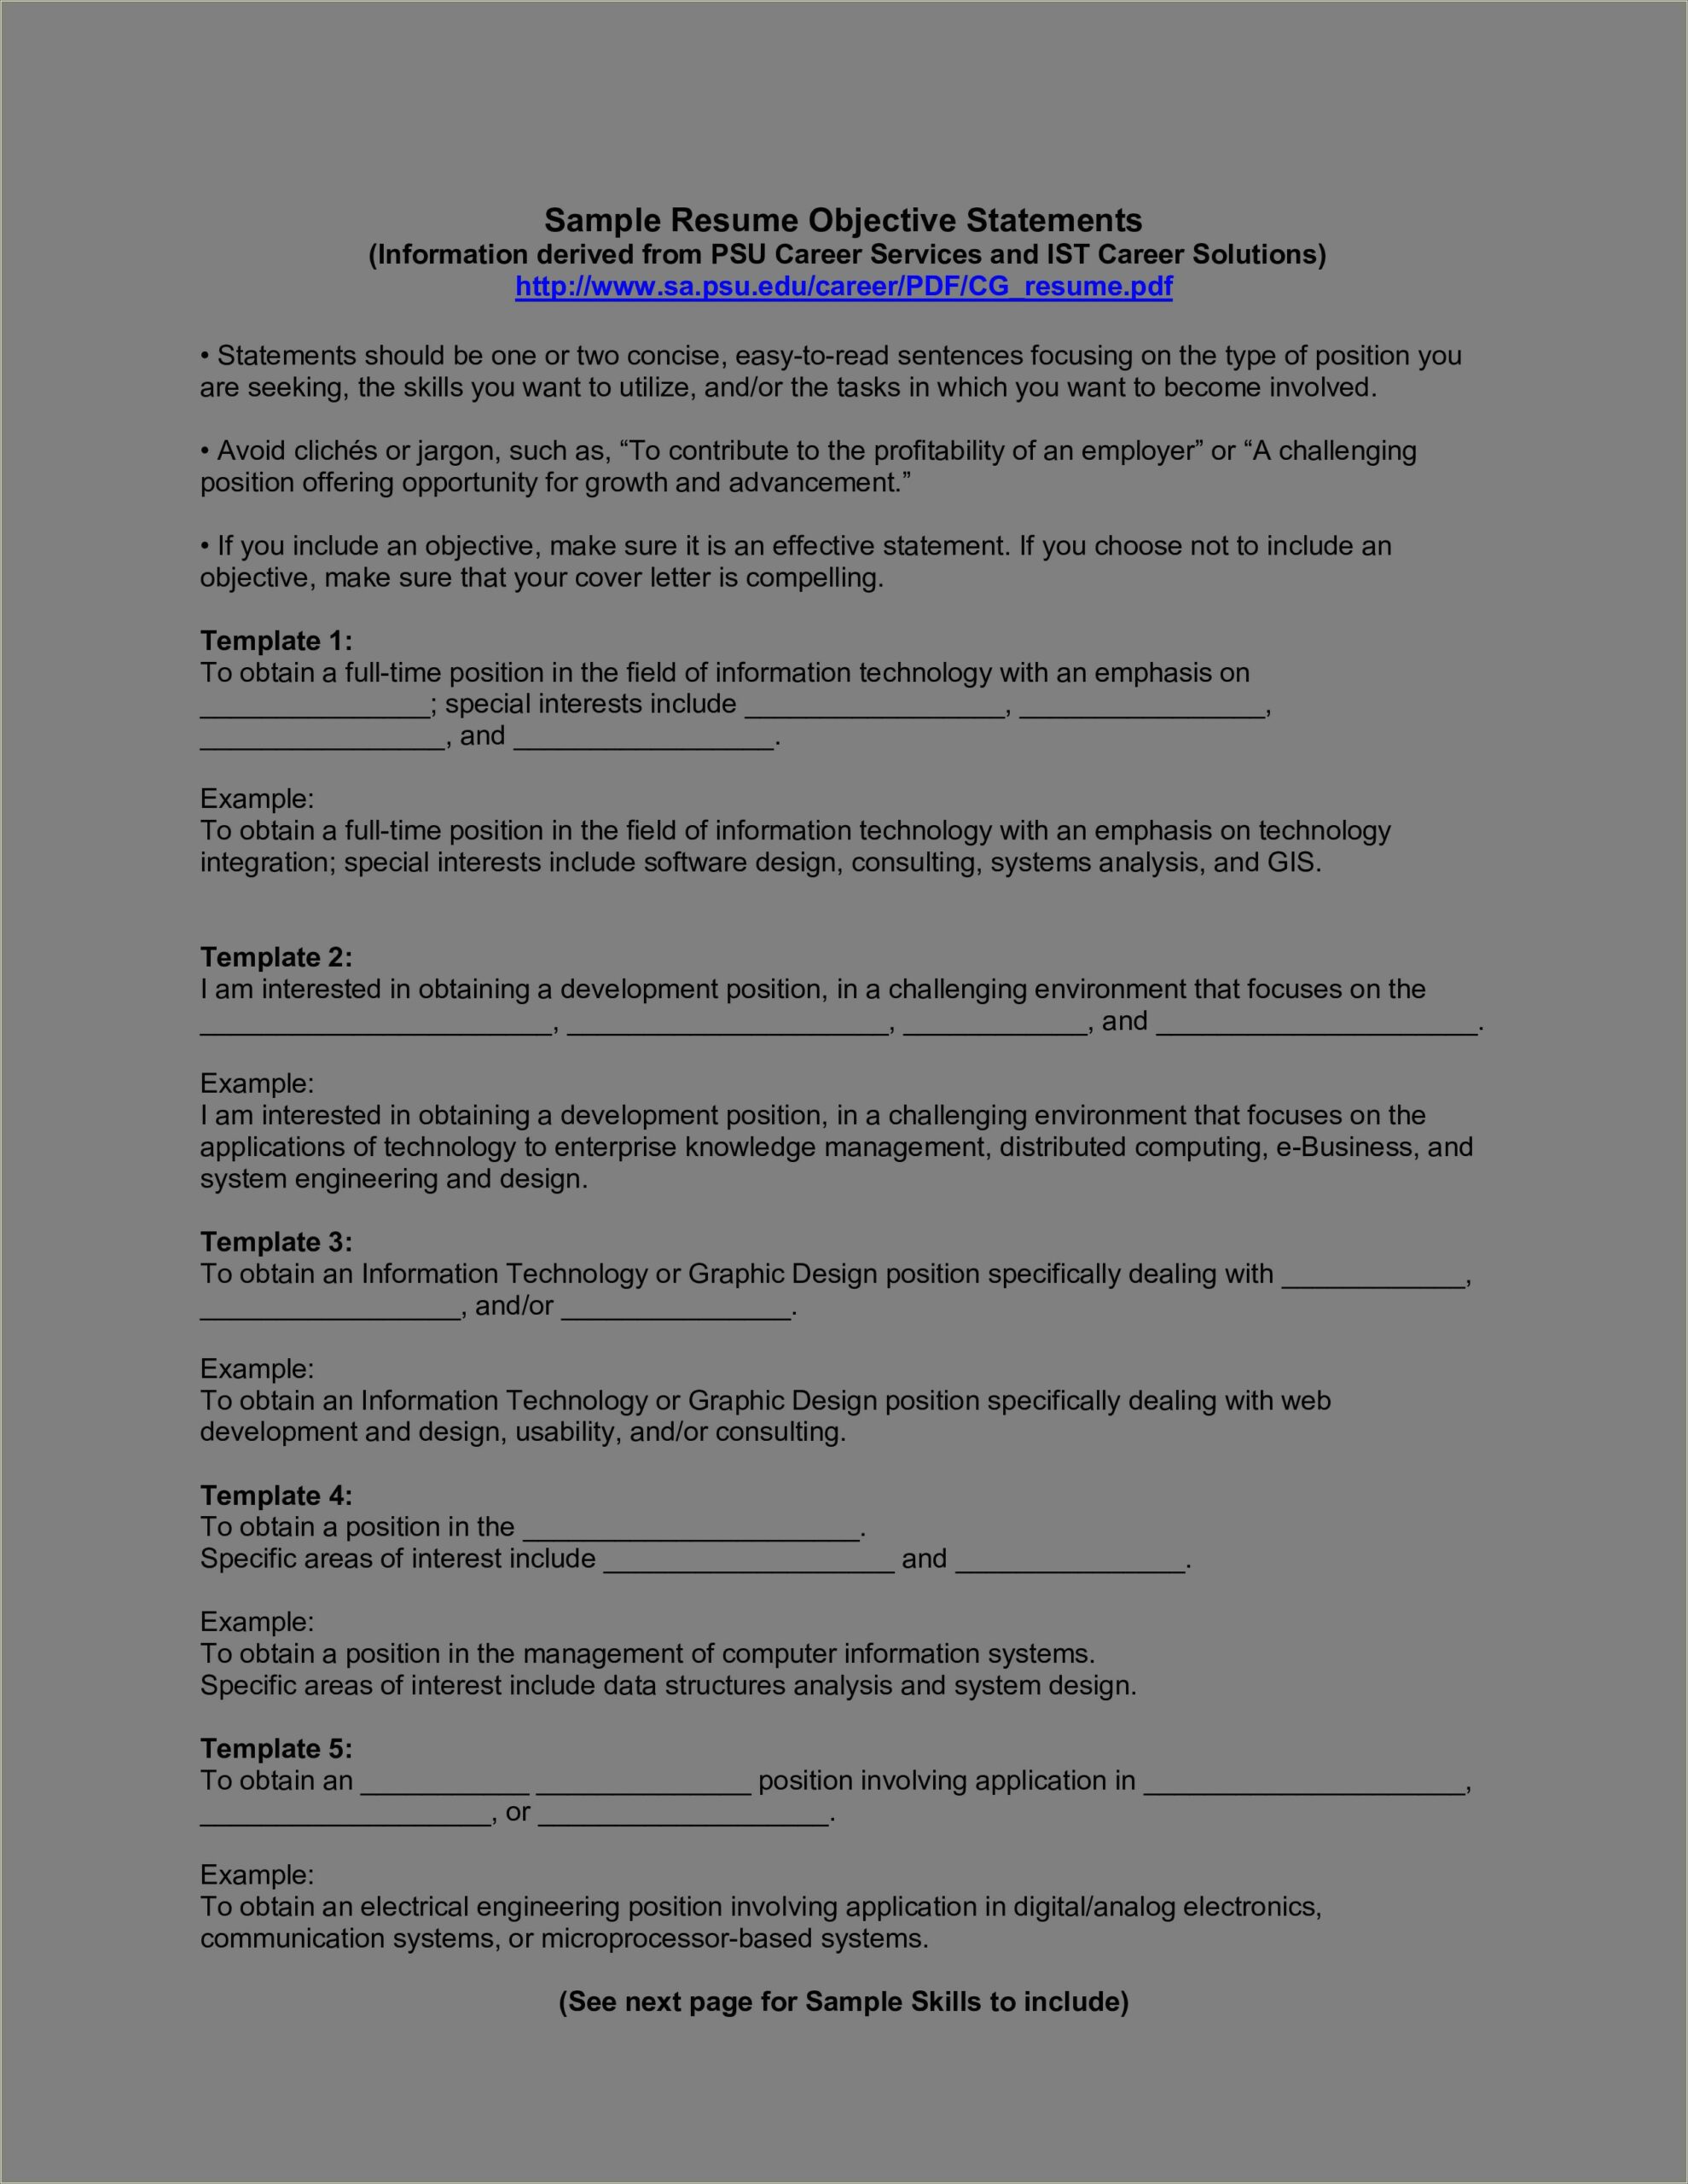 Sample Resume Objective Statements For Engineers